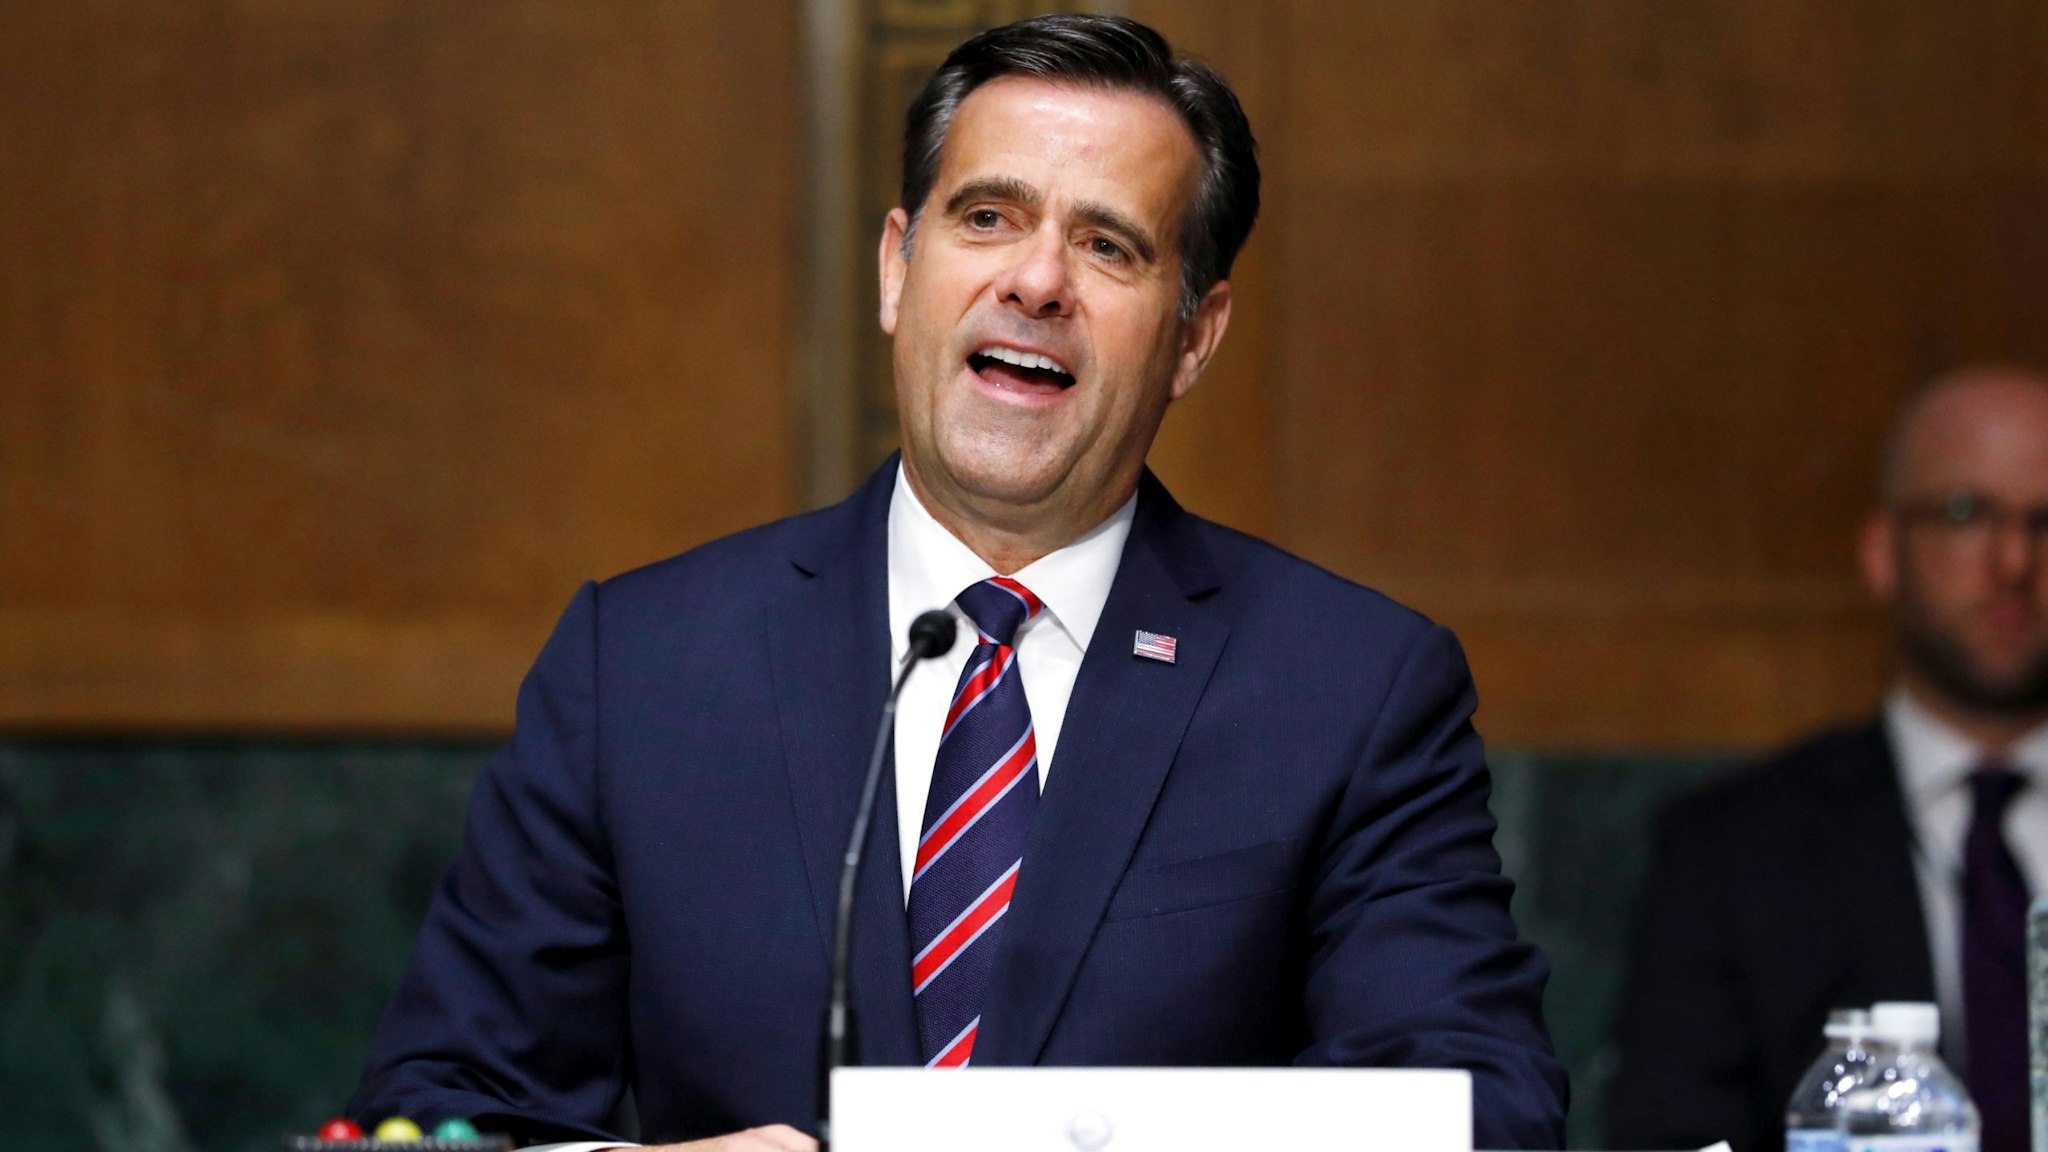 Rep. John Ratcliffe, R-TX, gives an opening statement before a Senate Intelligence Committee nomination hearing on Capitol Hill in Washington,DC on May 5, 2020. - The panel is considering Ratcliffes nomination for Director of National Intelligence.